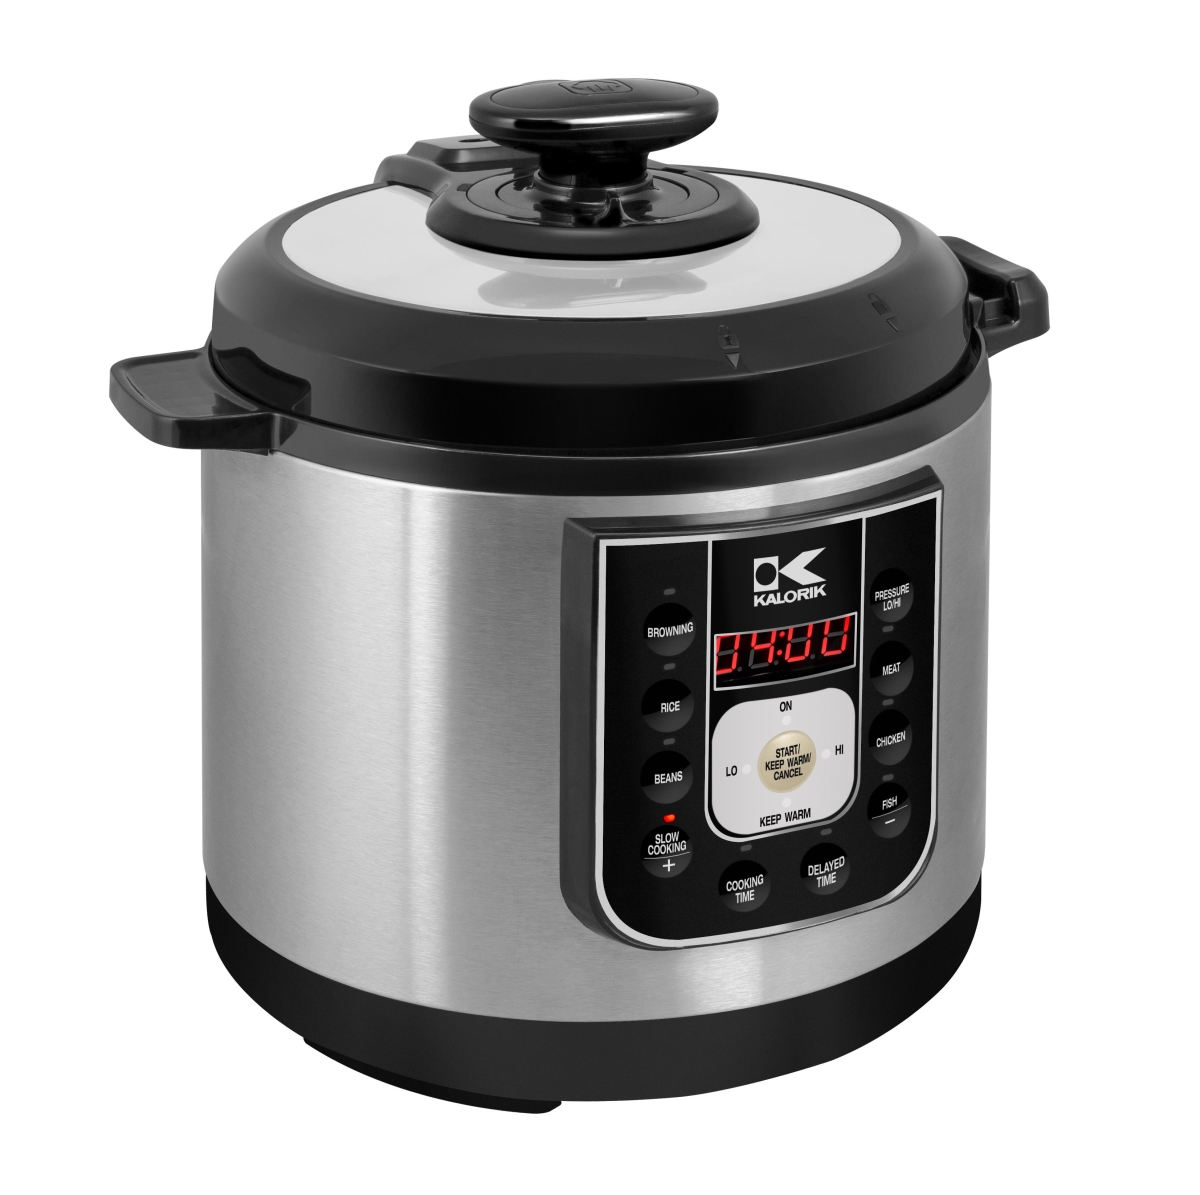 848052003682 Black & Stainless Steel Perfect Sear Pressure Cooker